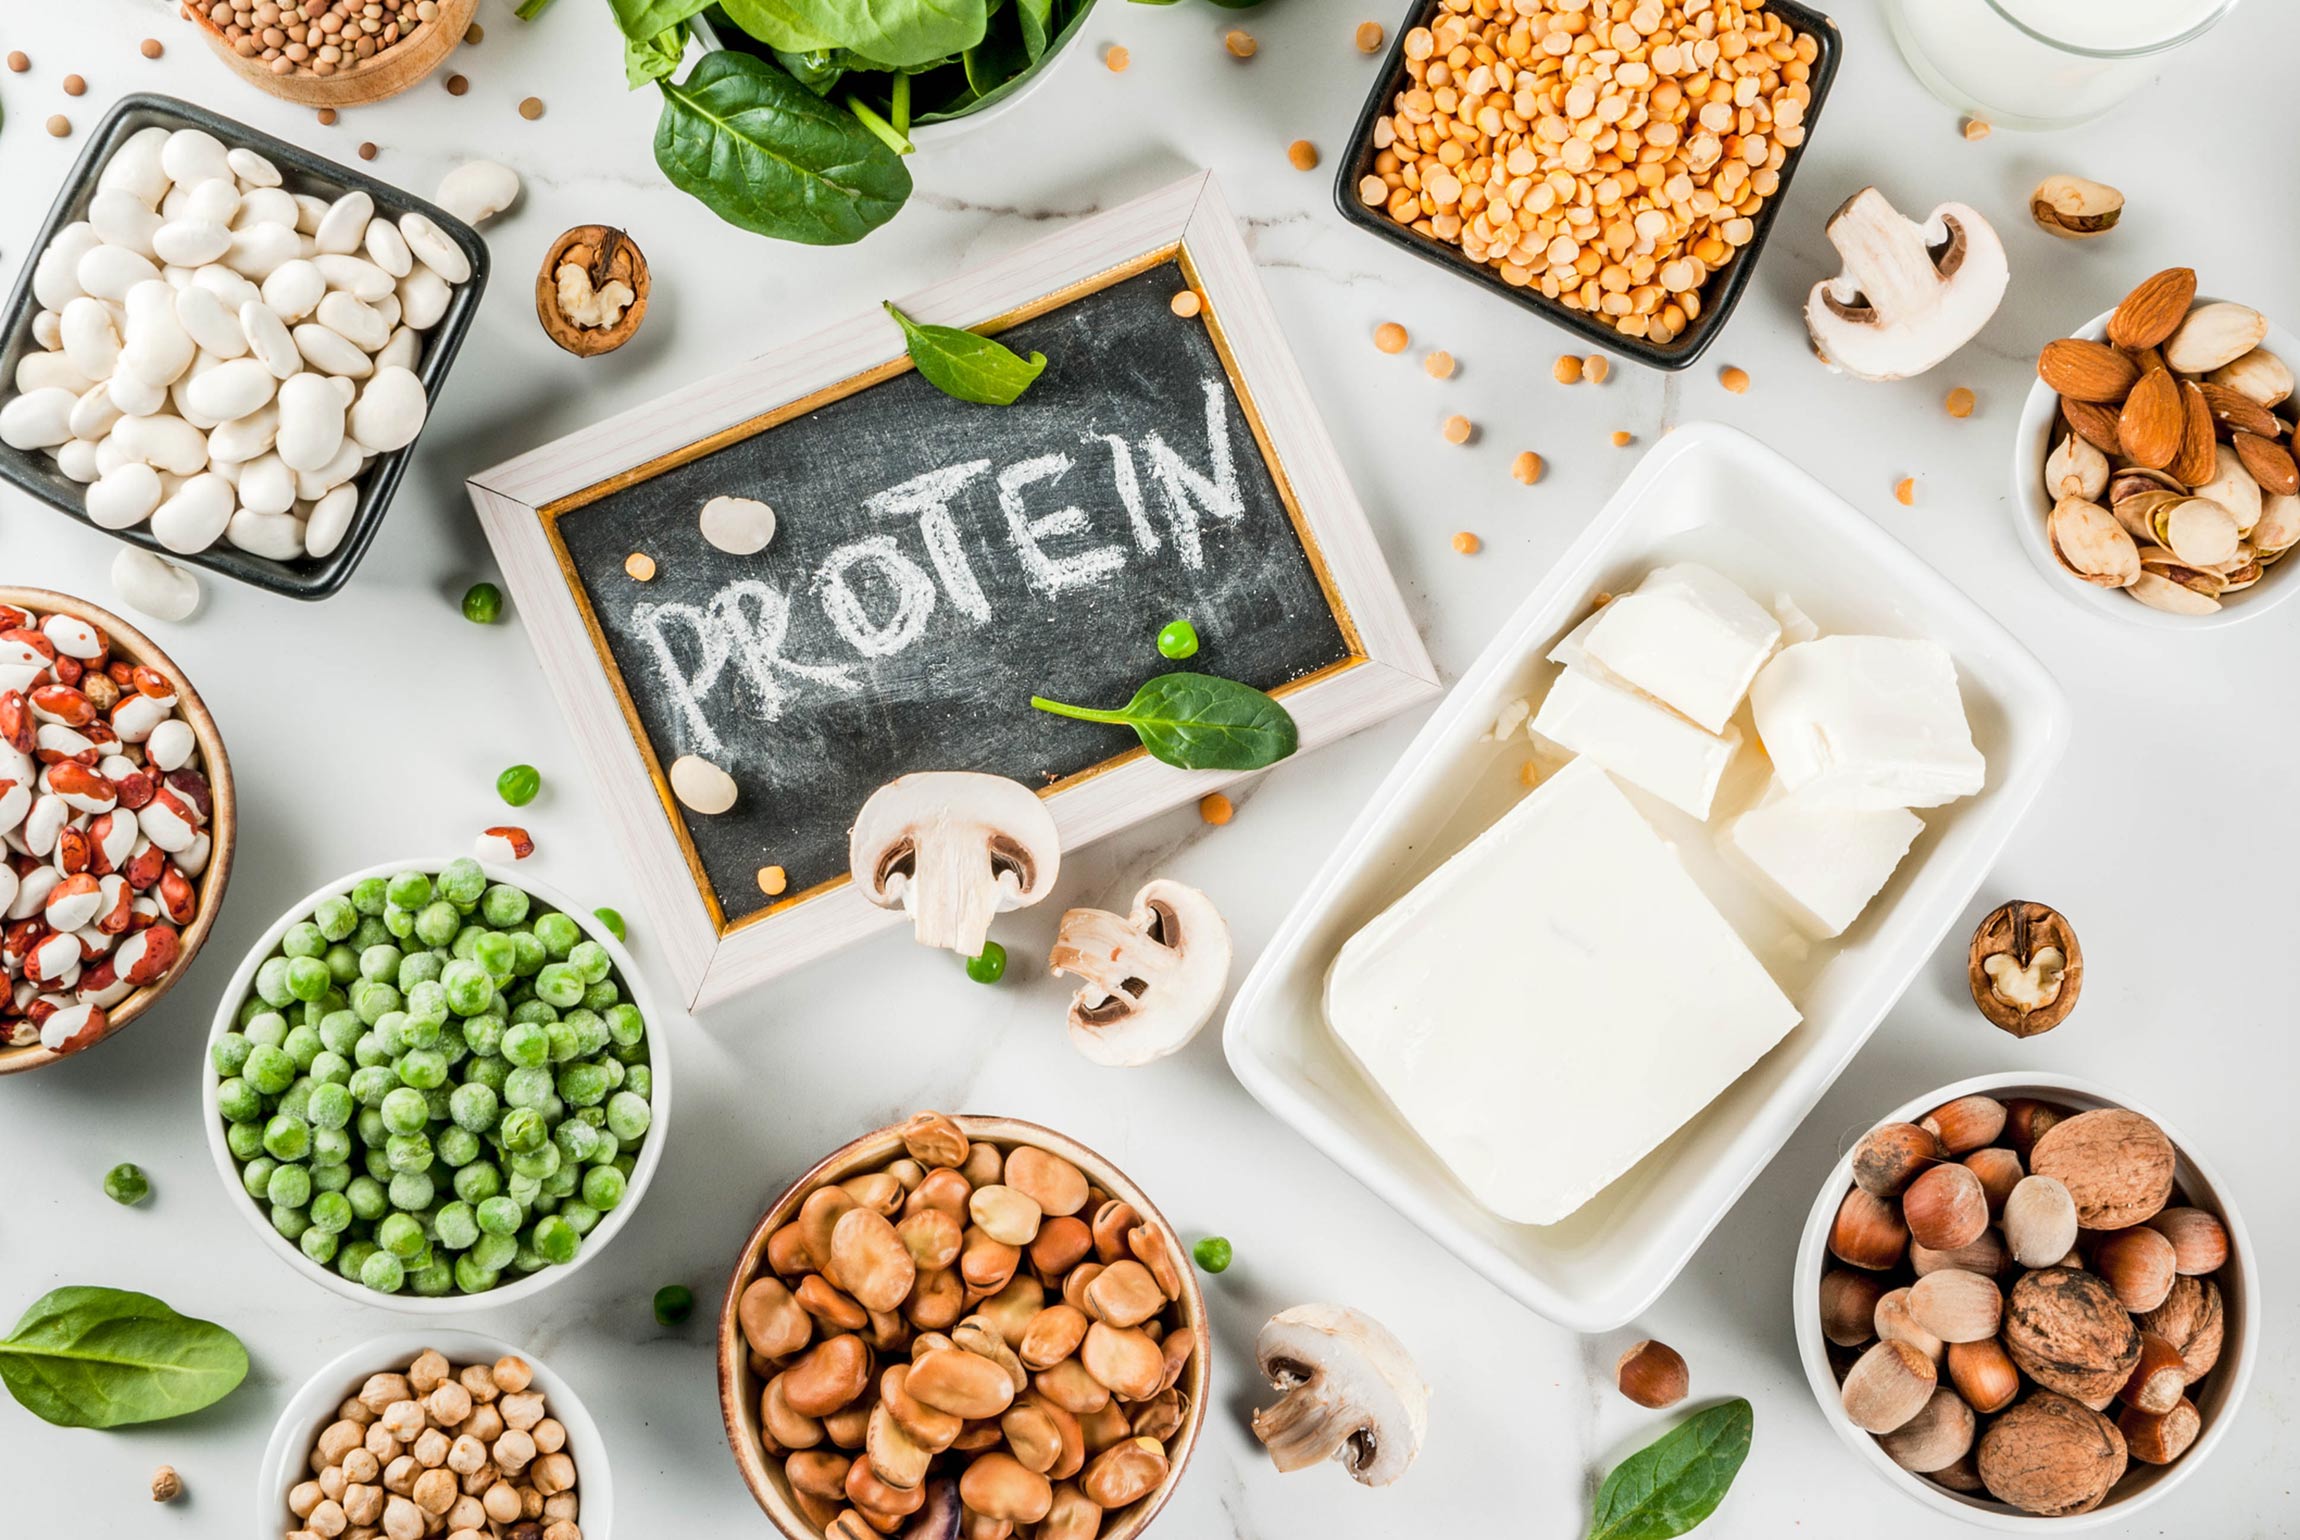 plant-based protein foods